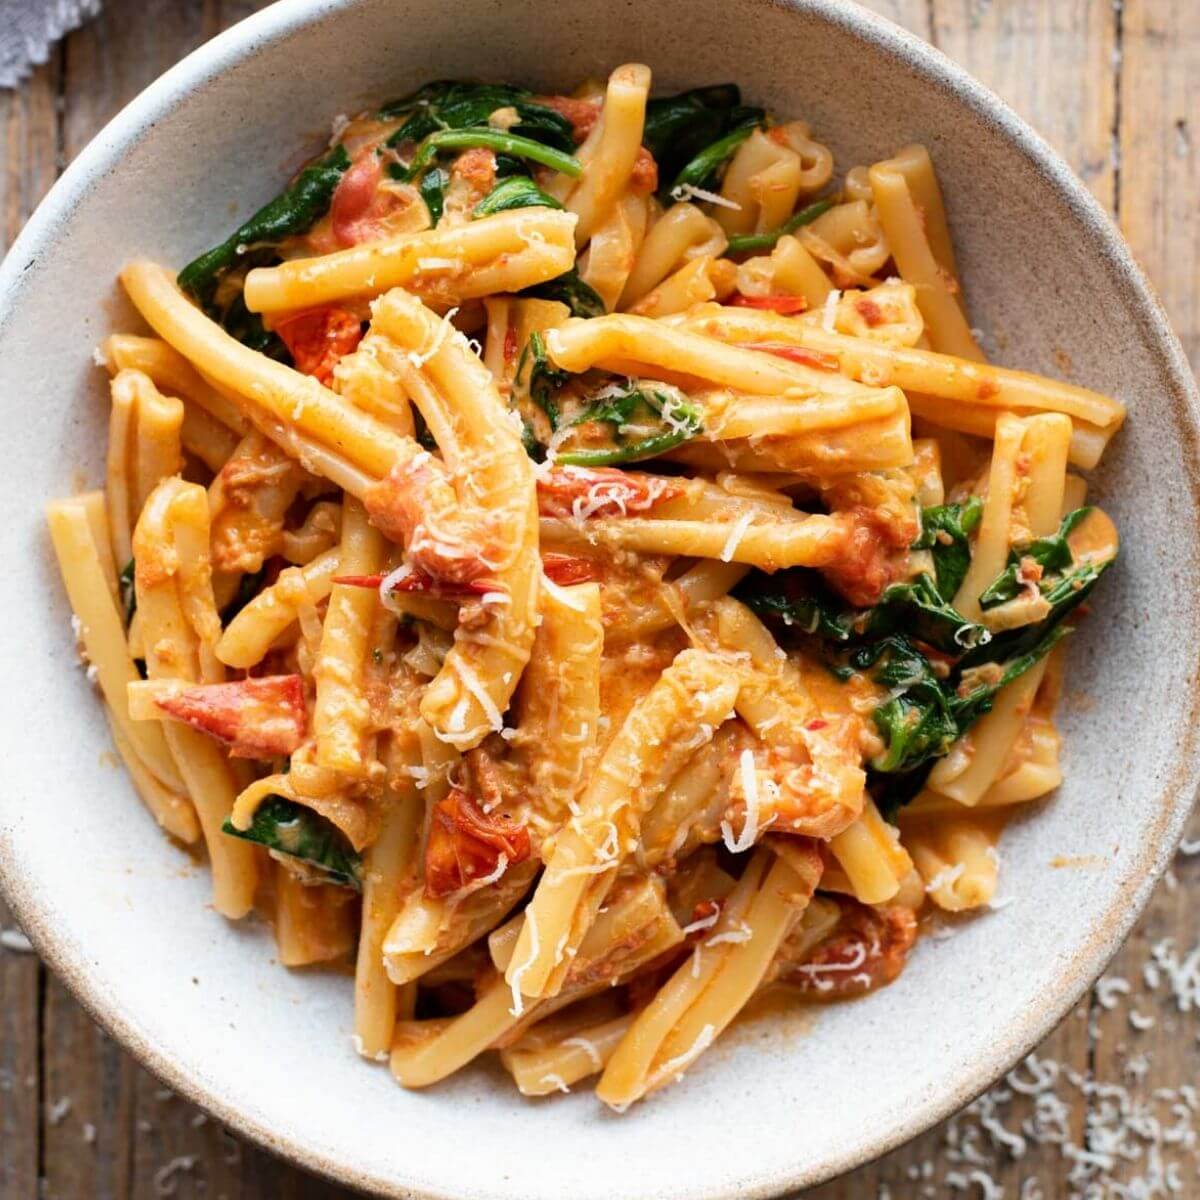 Creamy 'Nduja Pasta with Baby Spinach - Inside The Rustic Kitchen